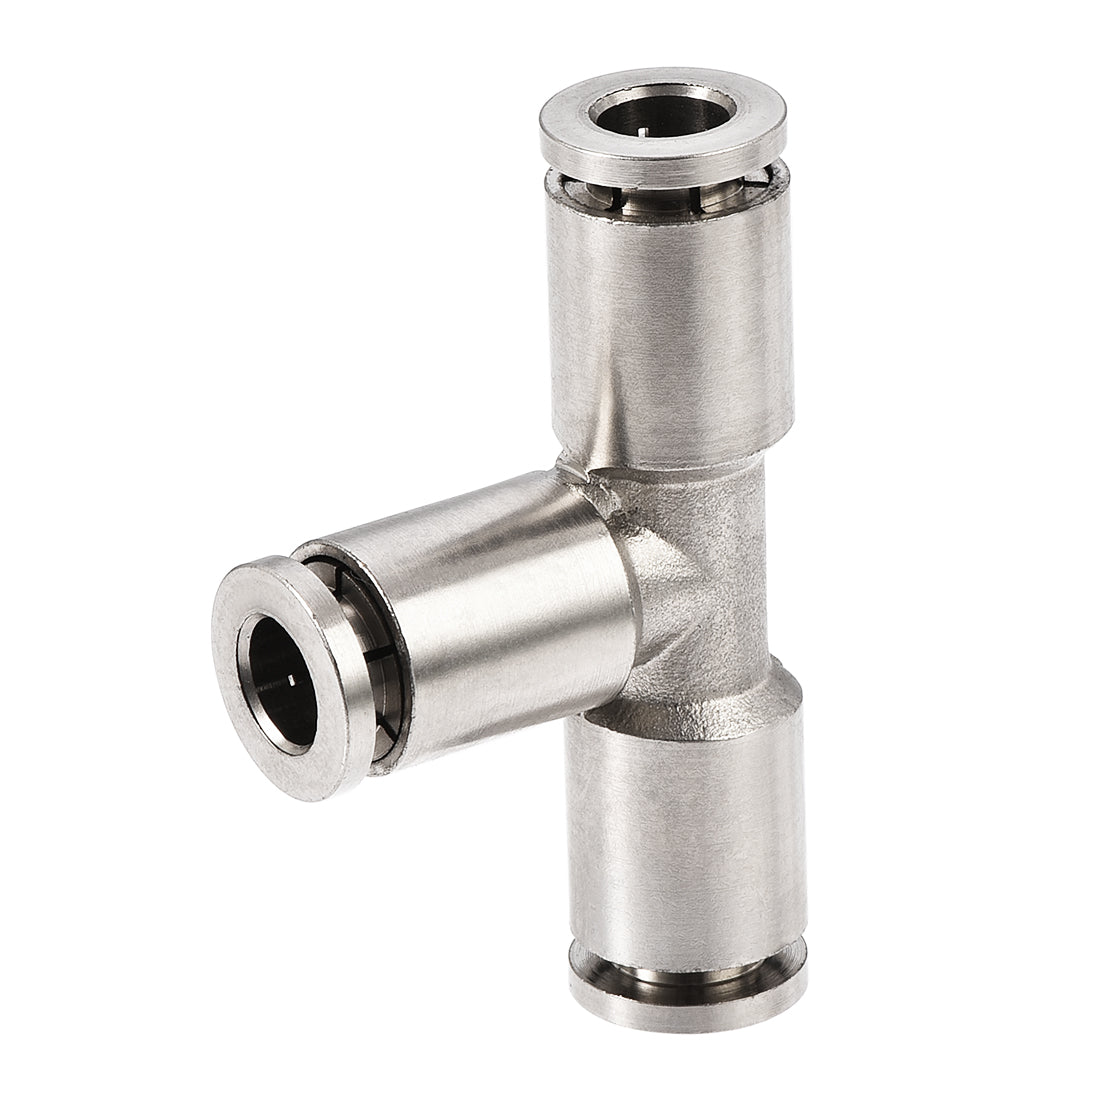 uxcell Uxcell Tee Push to Connect Tube Fittings 6mm OD Push Lock Nickel Plated Copper 2Pcs